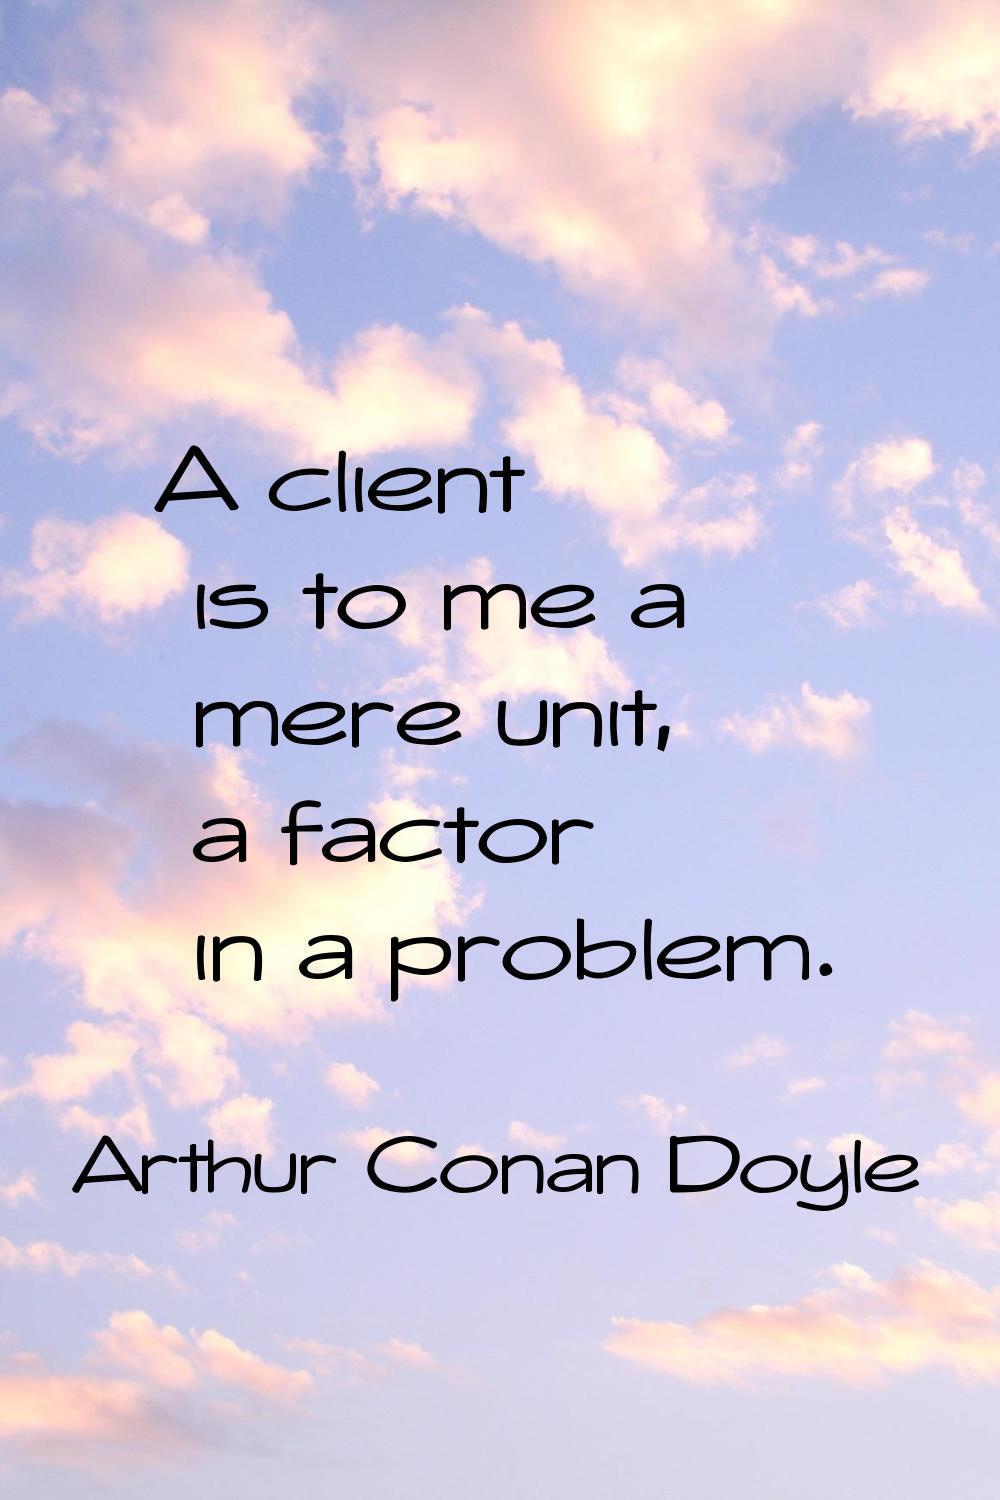 A client is to me a mere unit, a factor in a problem.